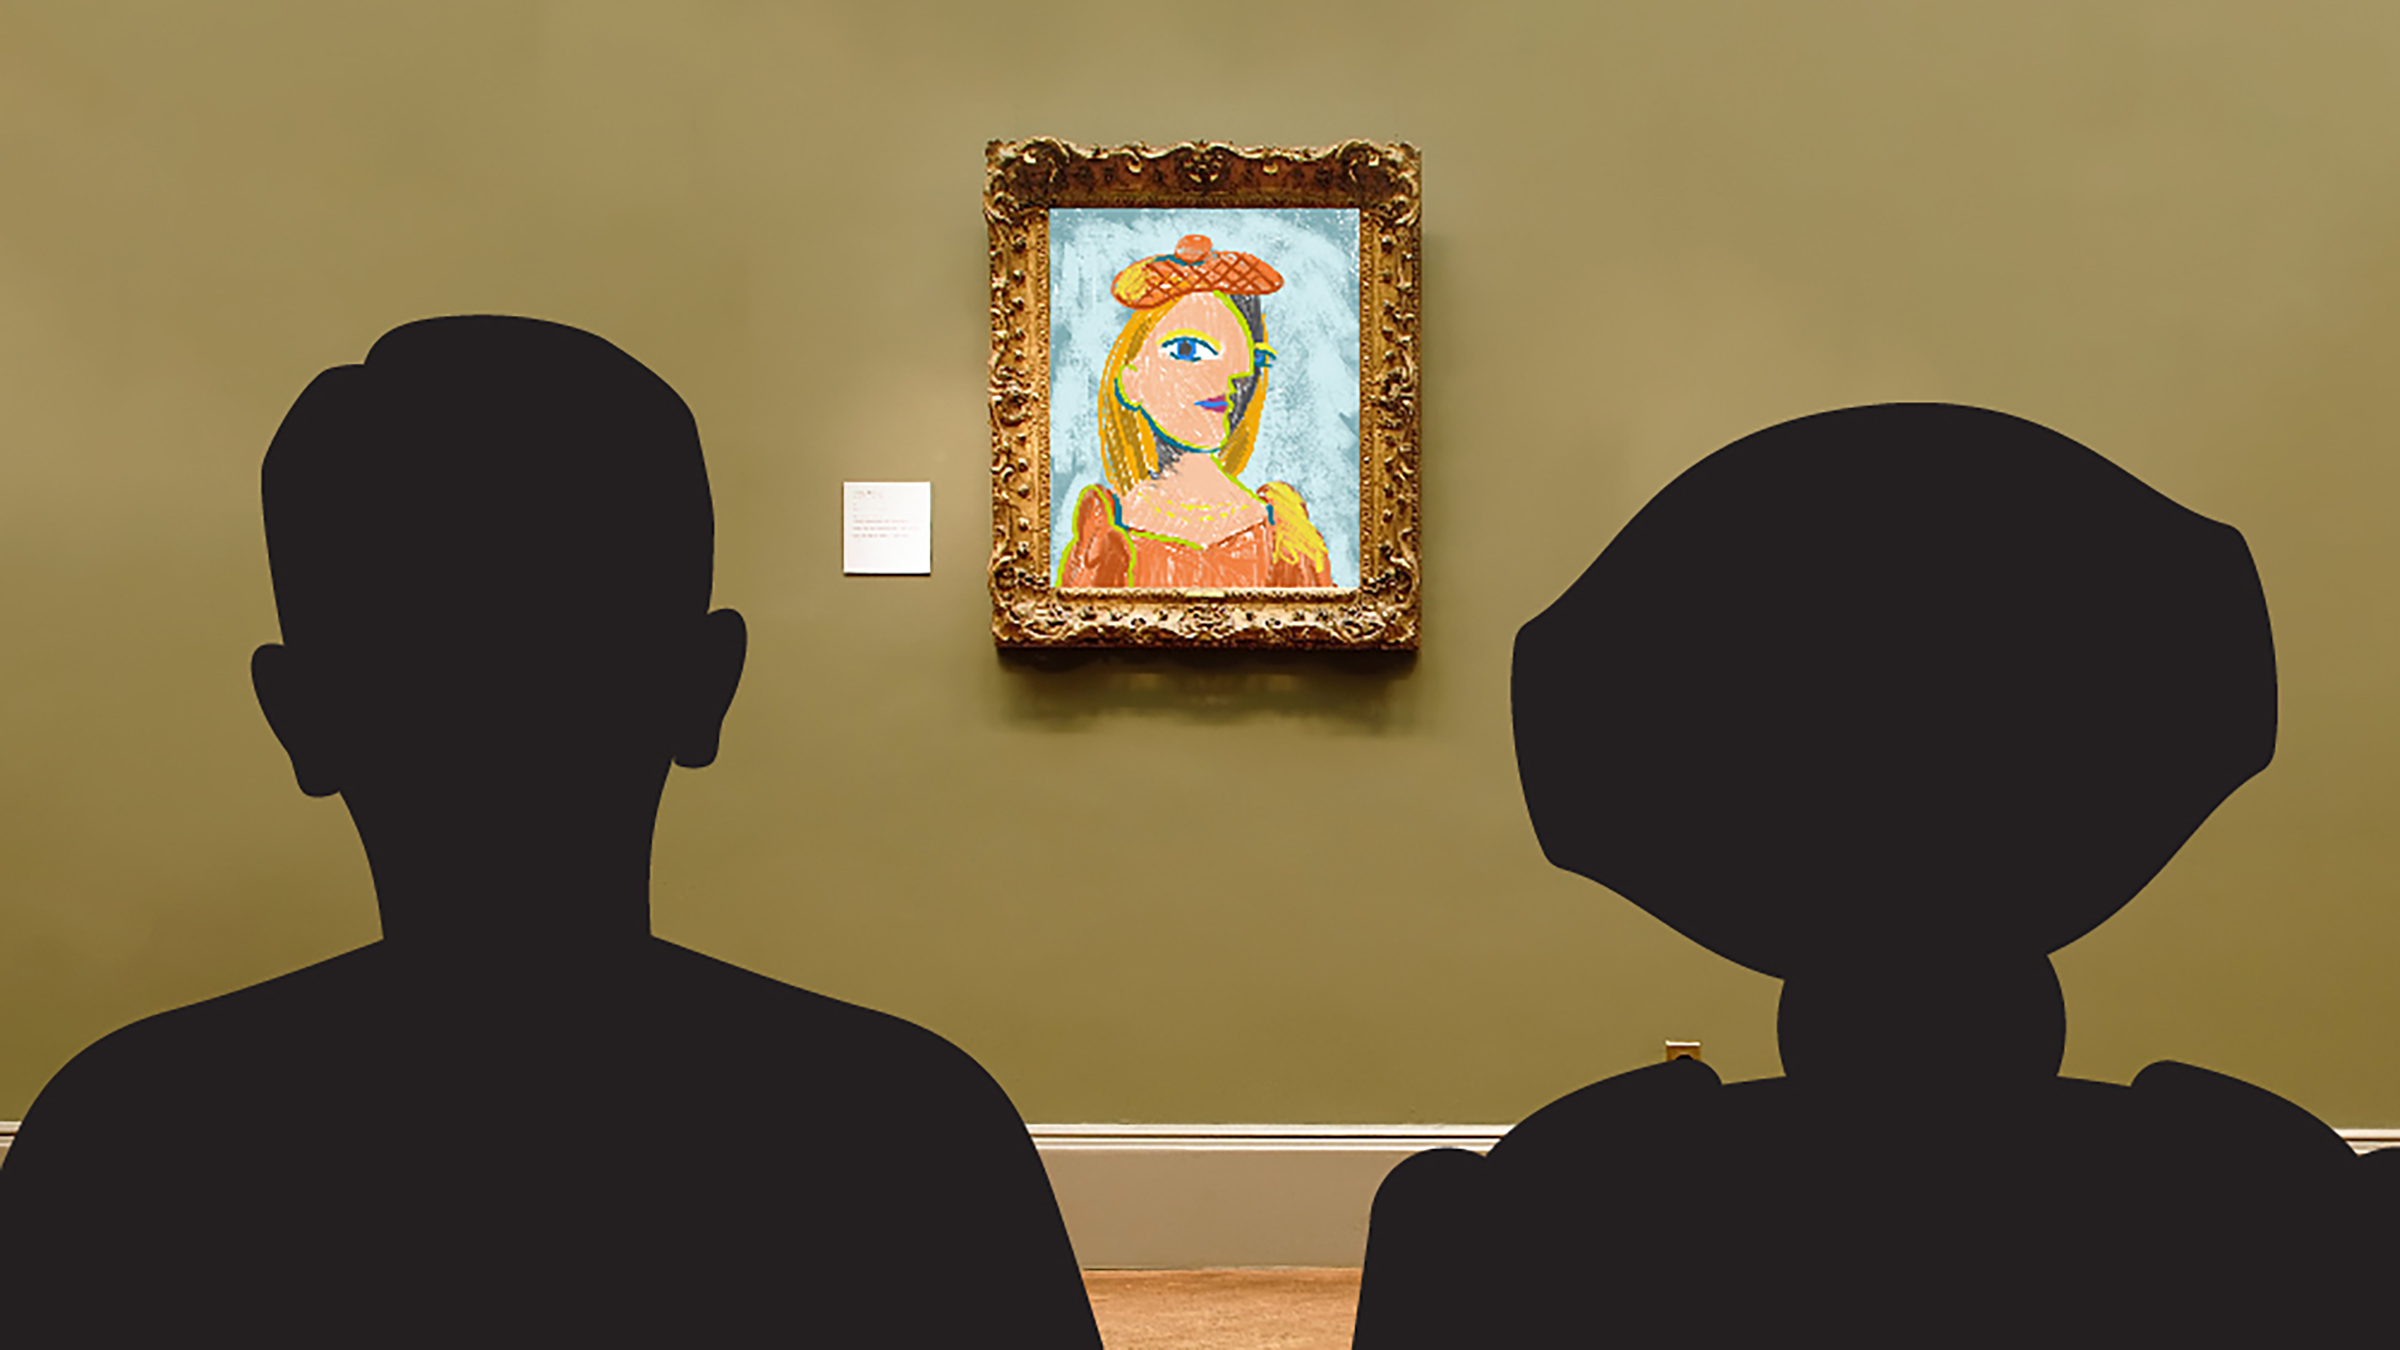 Silhouettes of a human and a robot looking at a painting in a museum